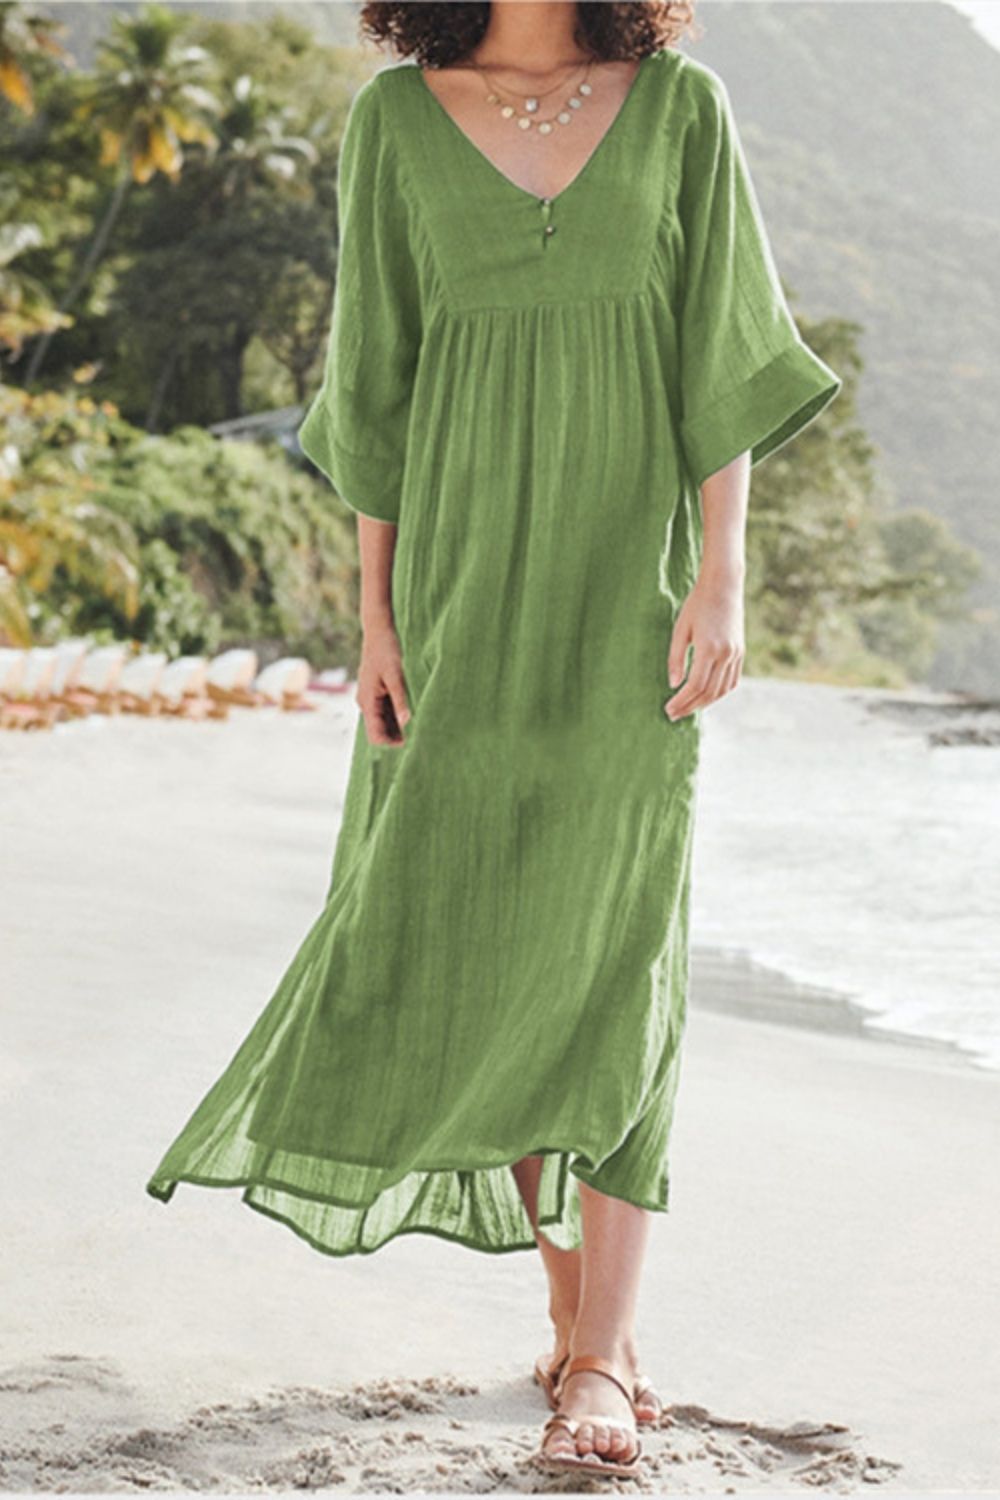 New Spring European And American Fashion Solid Color Loose Cotton And Linen Split Dress Women